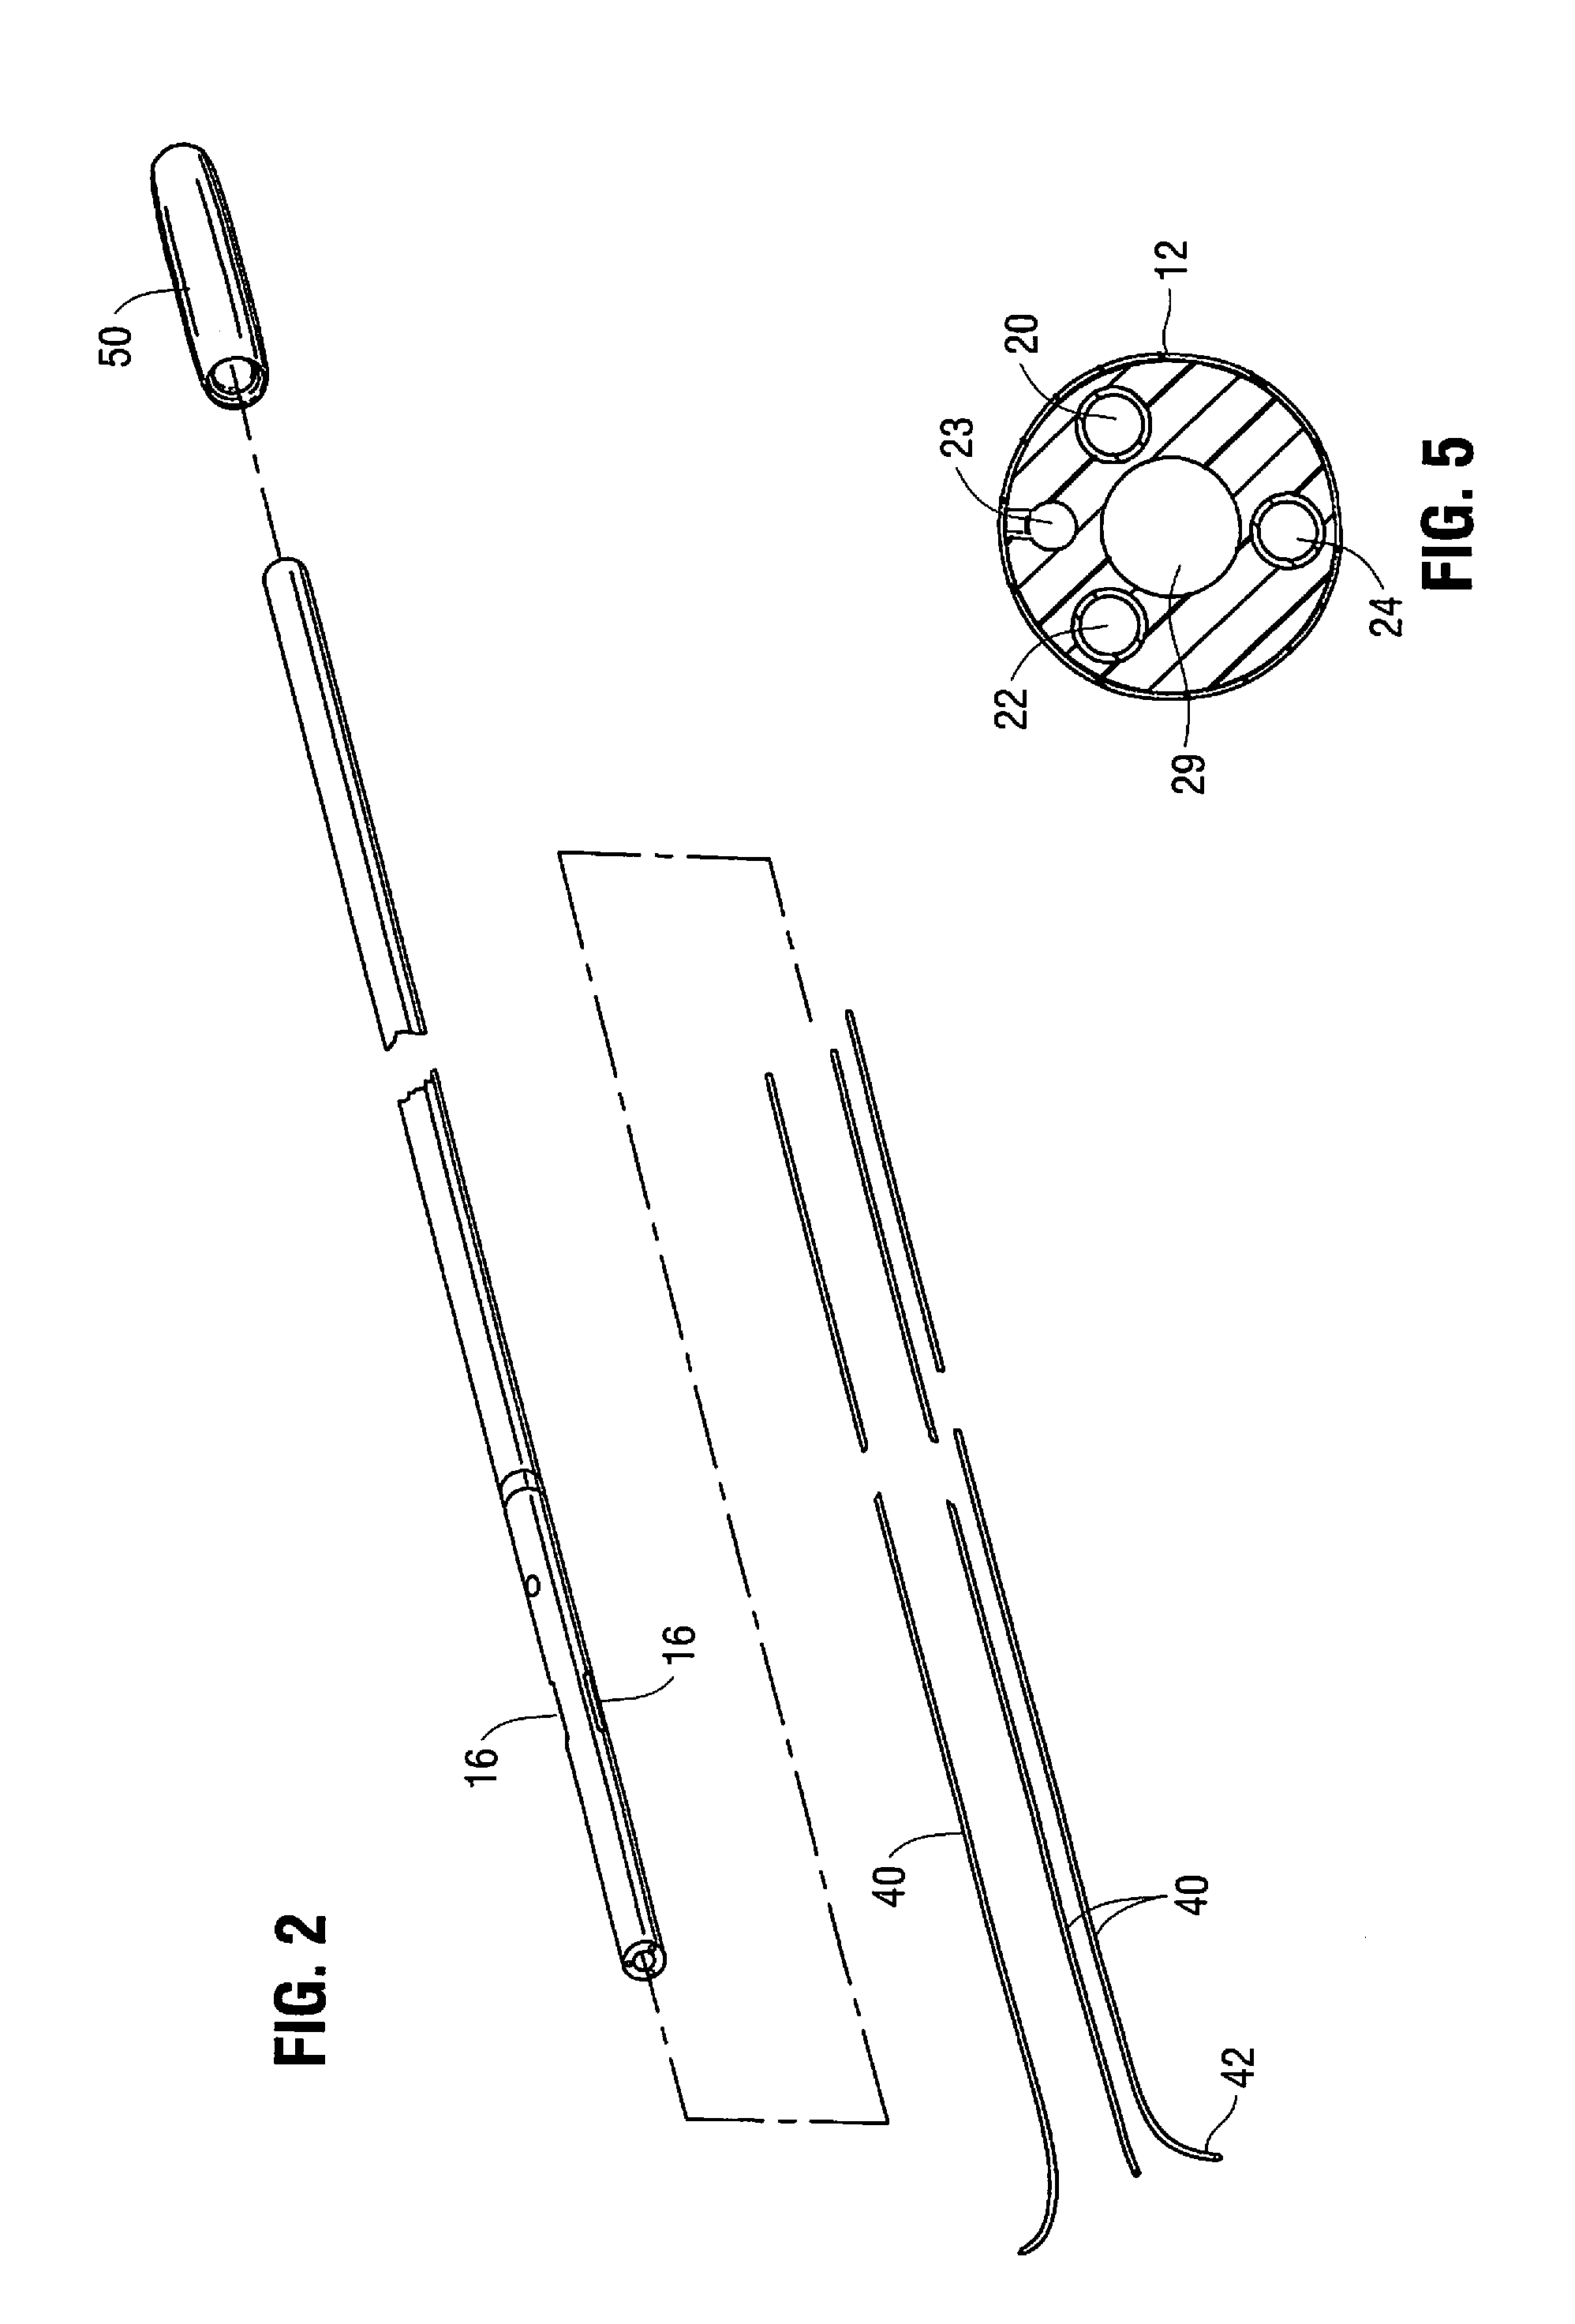 Apparatus for delivering fluid to treat renal hypertension